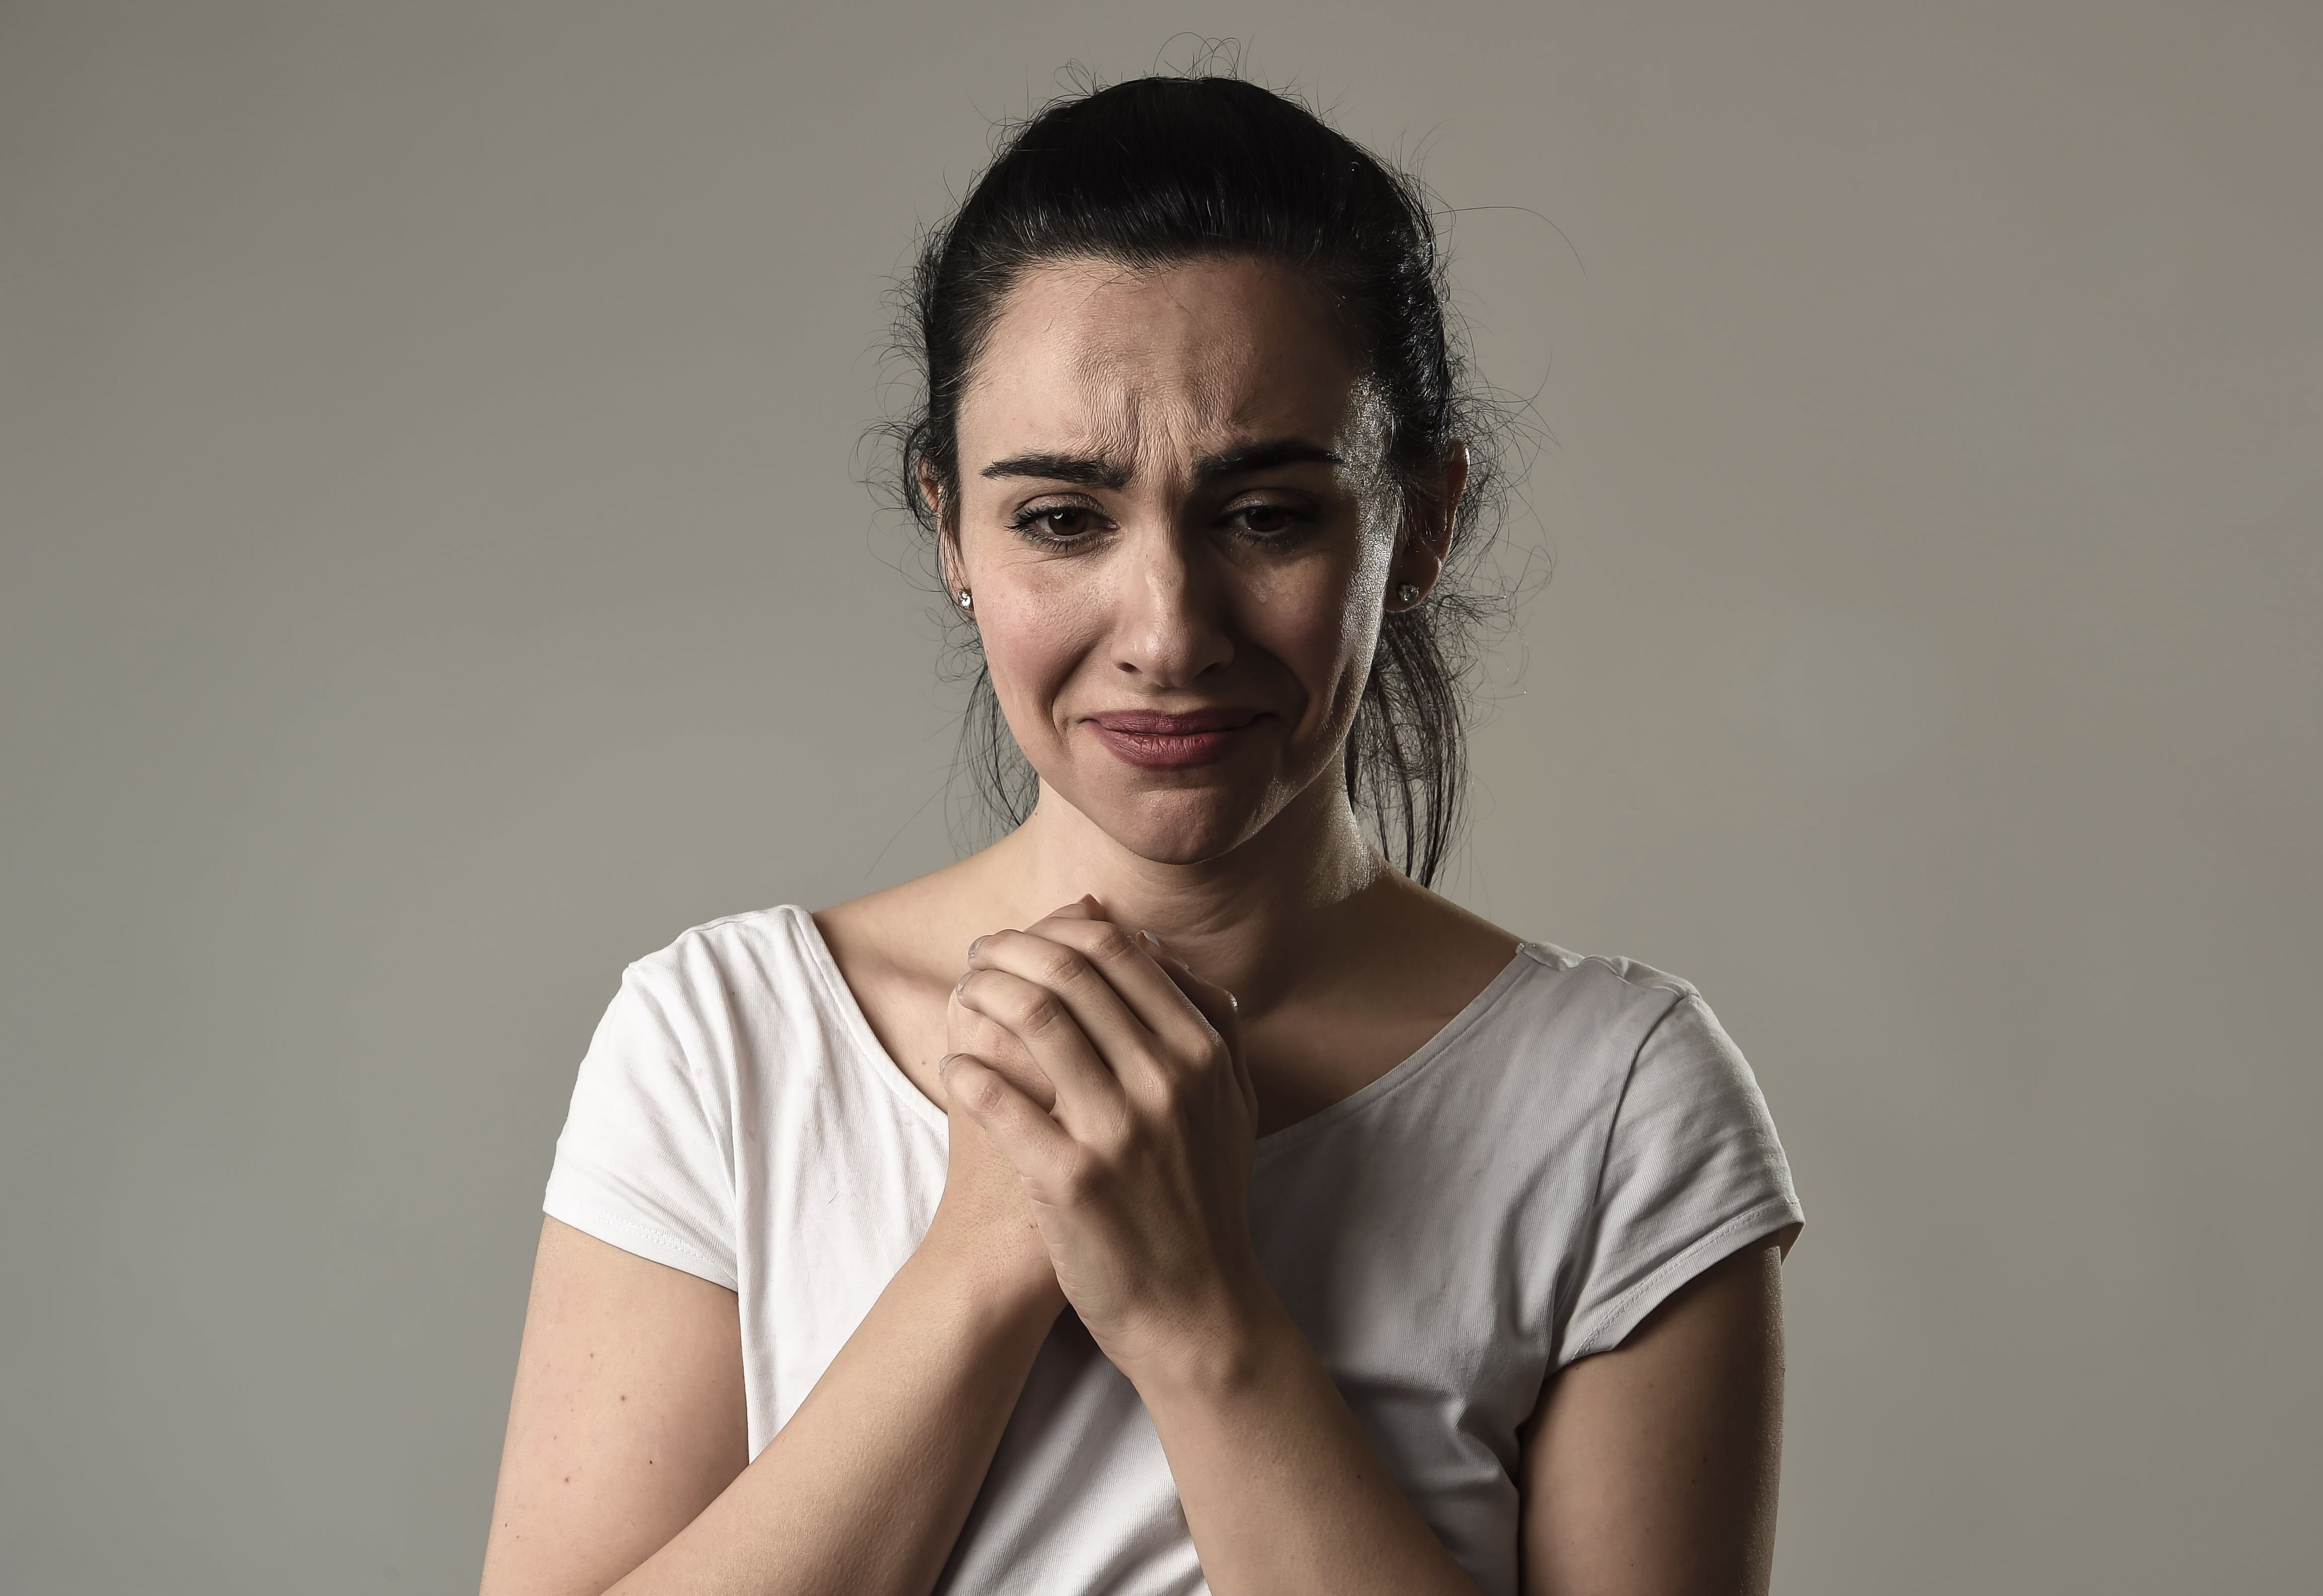 A woman clasps her hands together and shows sadness. | Source: Shutterstock